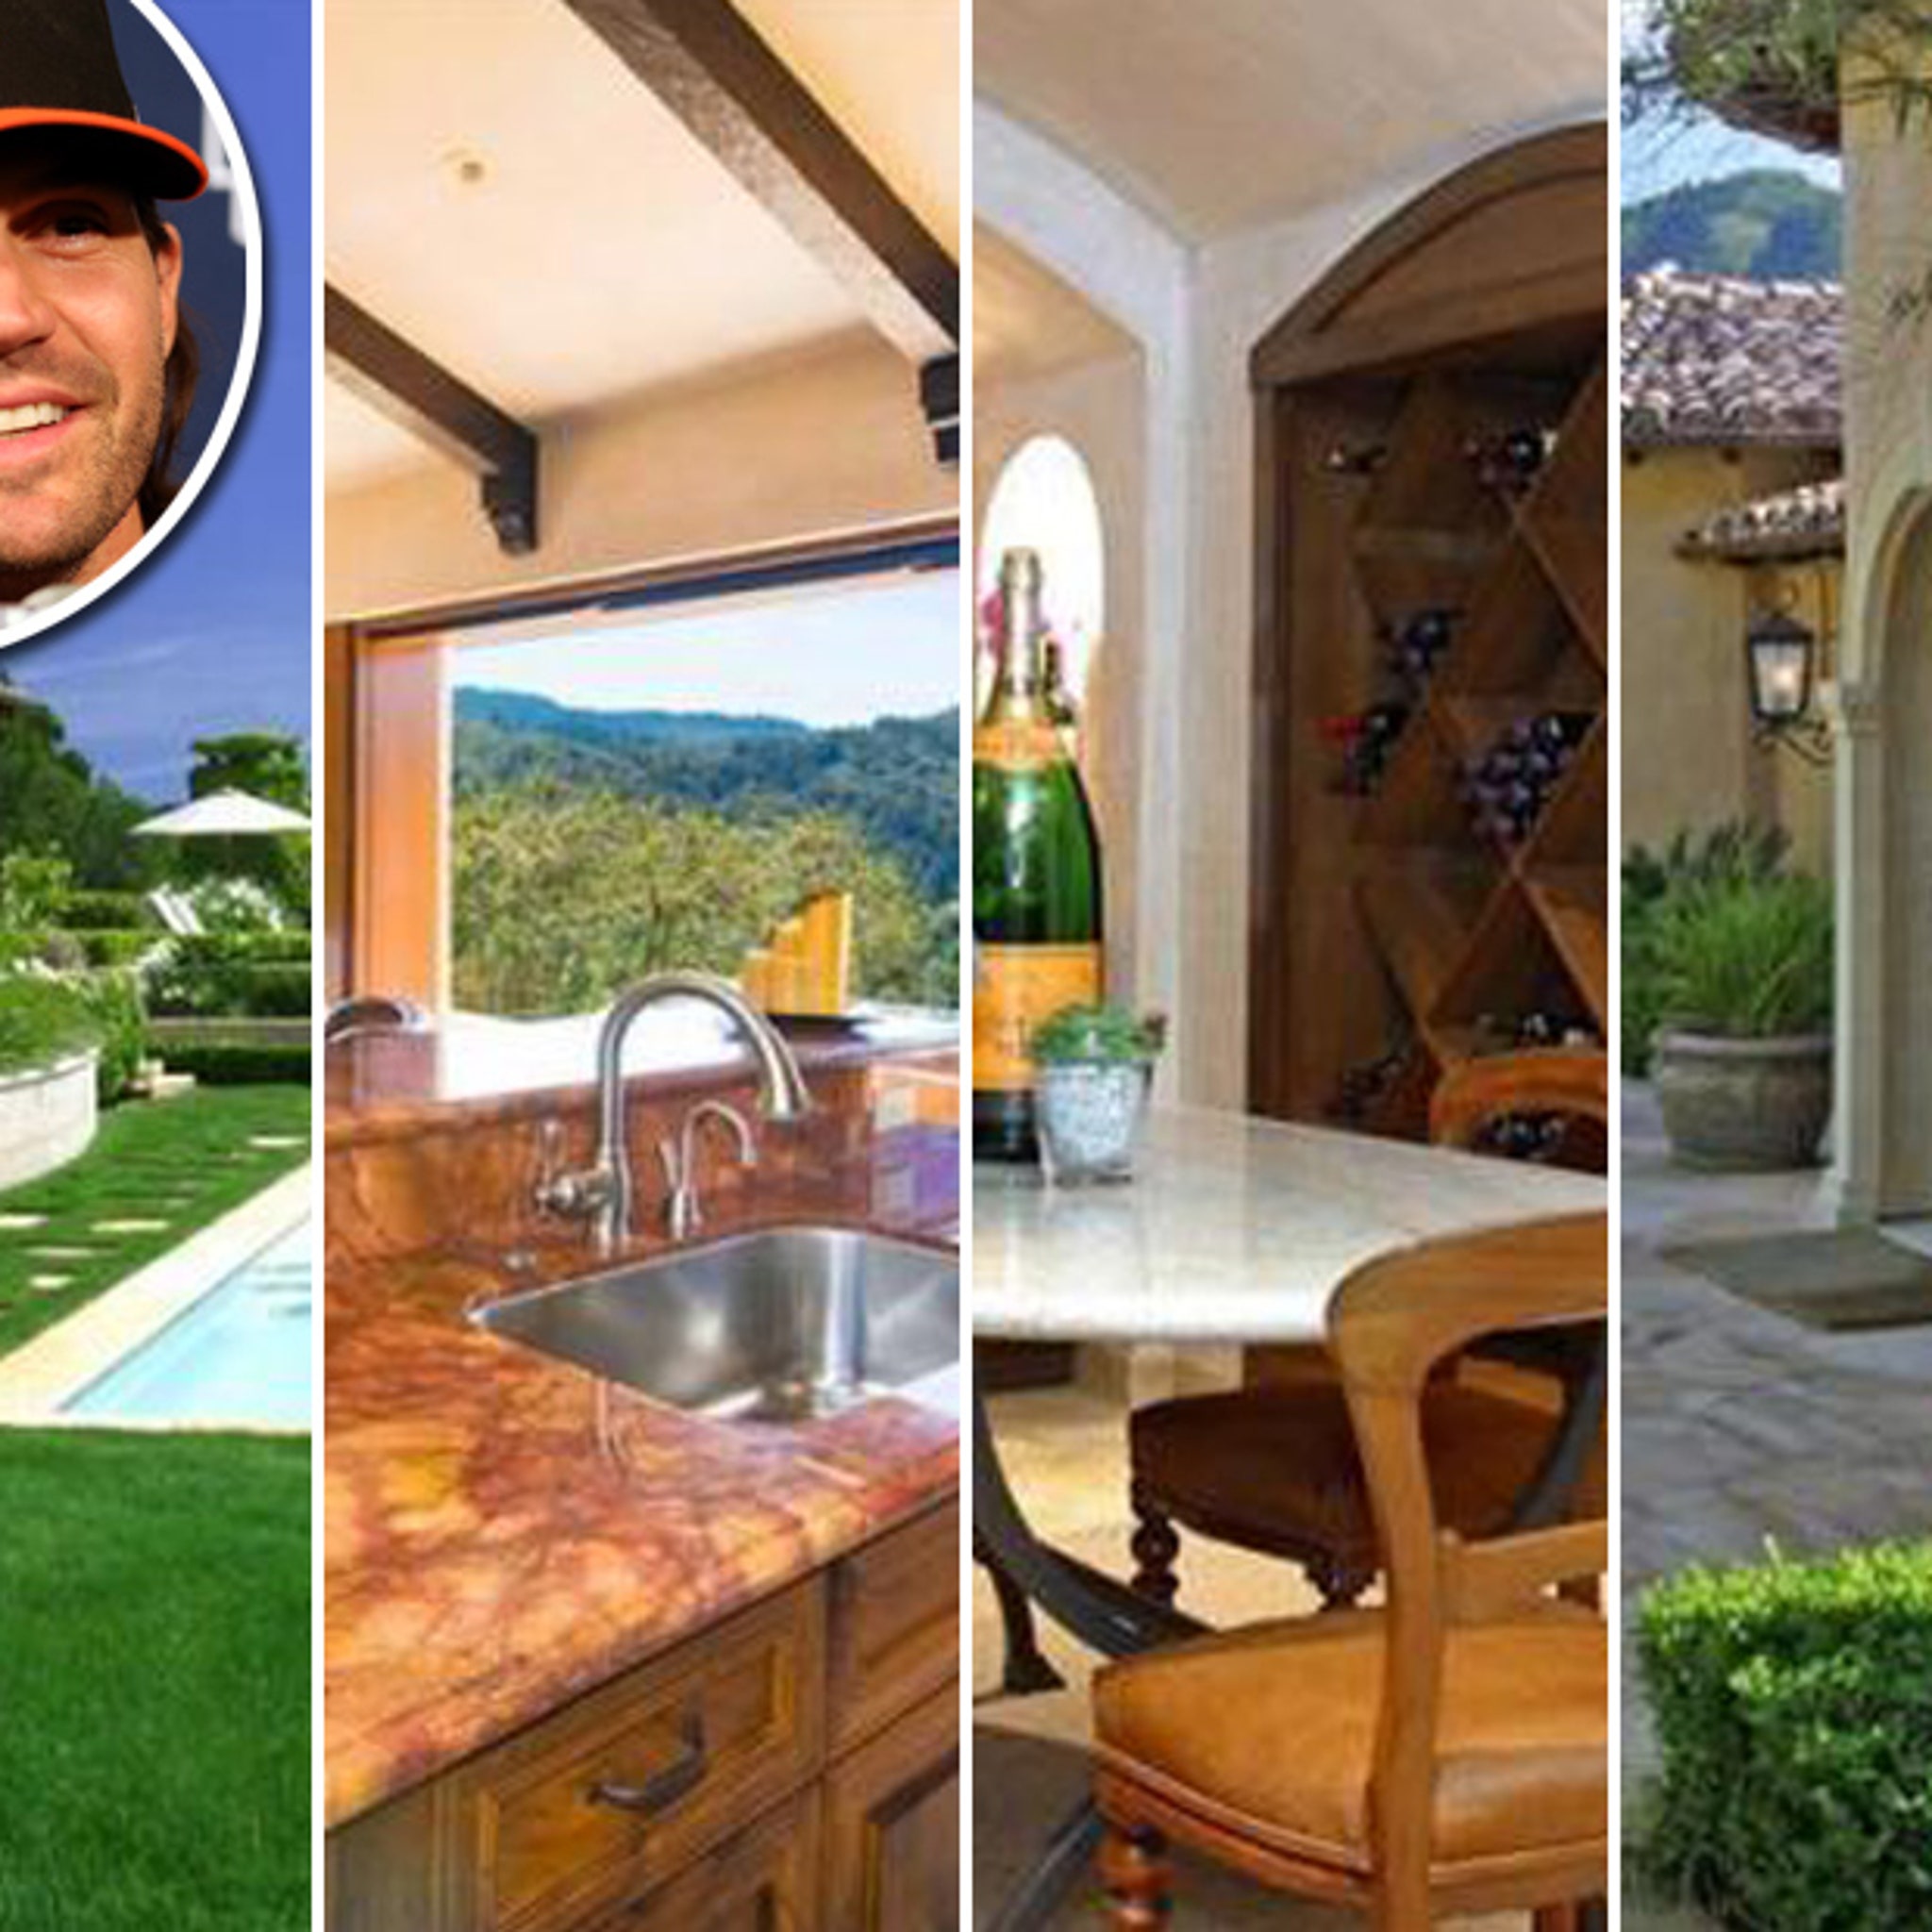 Barry Zito's Kentfield mansion sells for $8.15 million – Marin